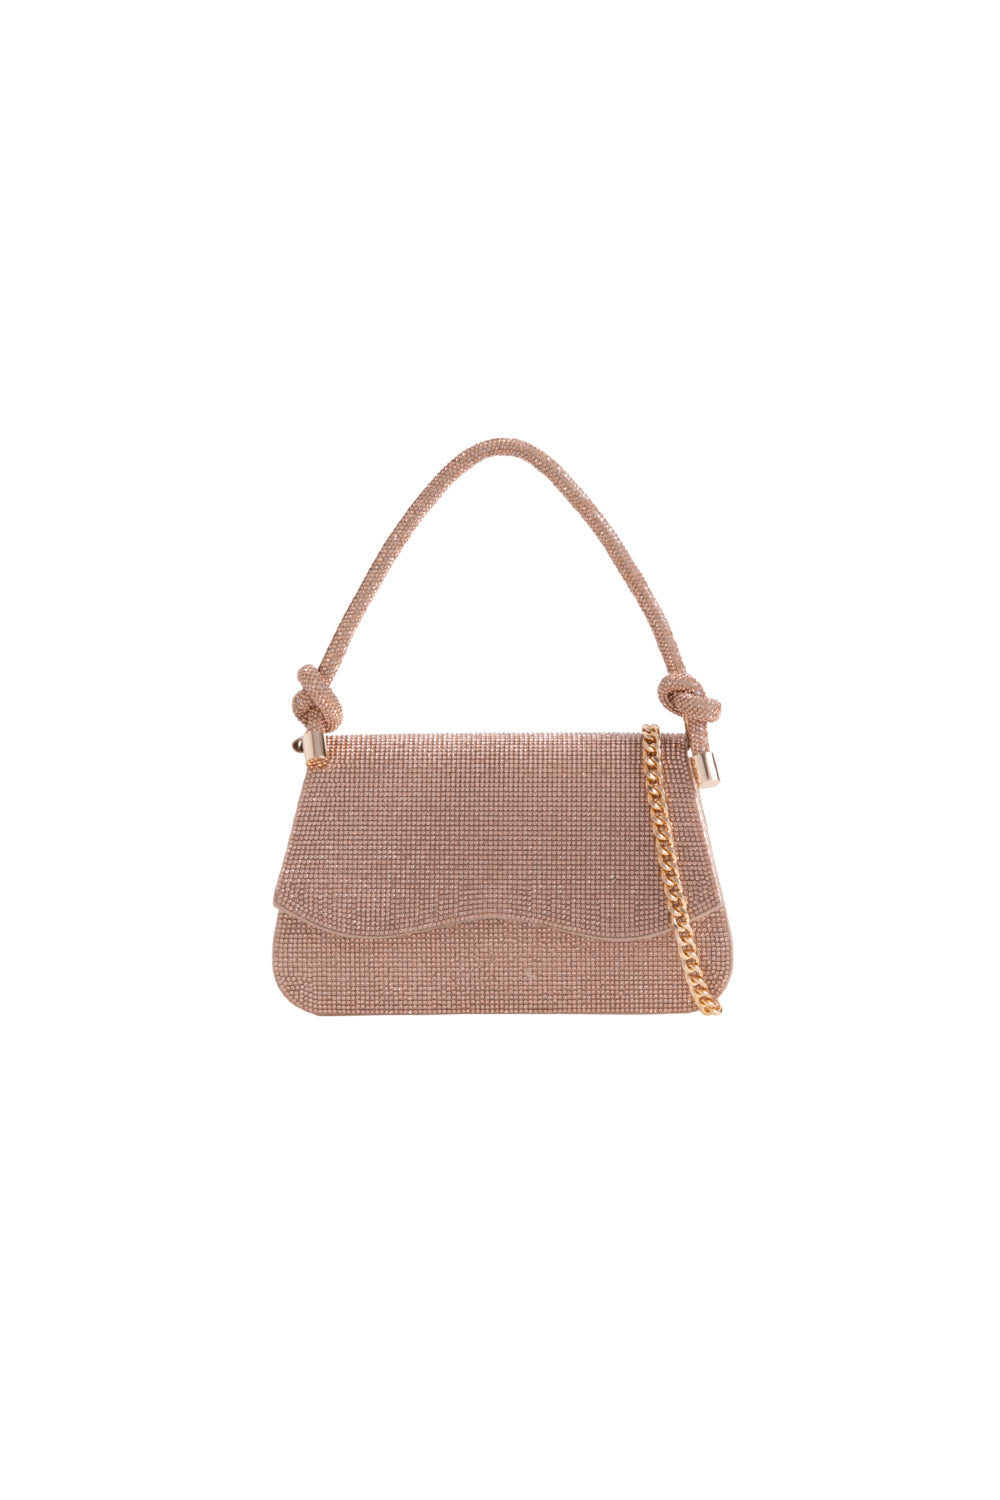 Rose Gold Diamante Top Handle Bag With Knot Details ALLD3220